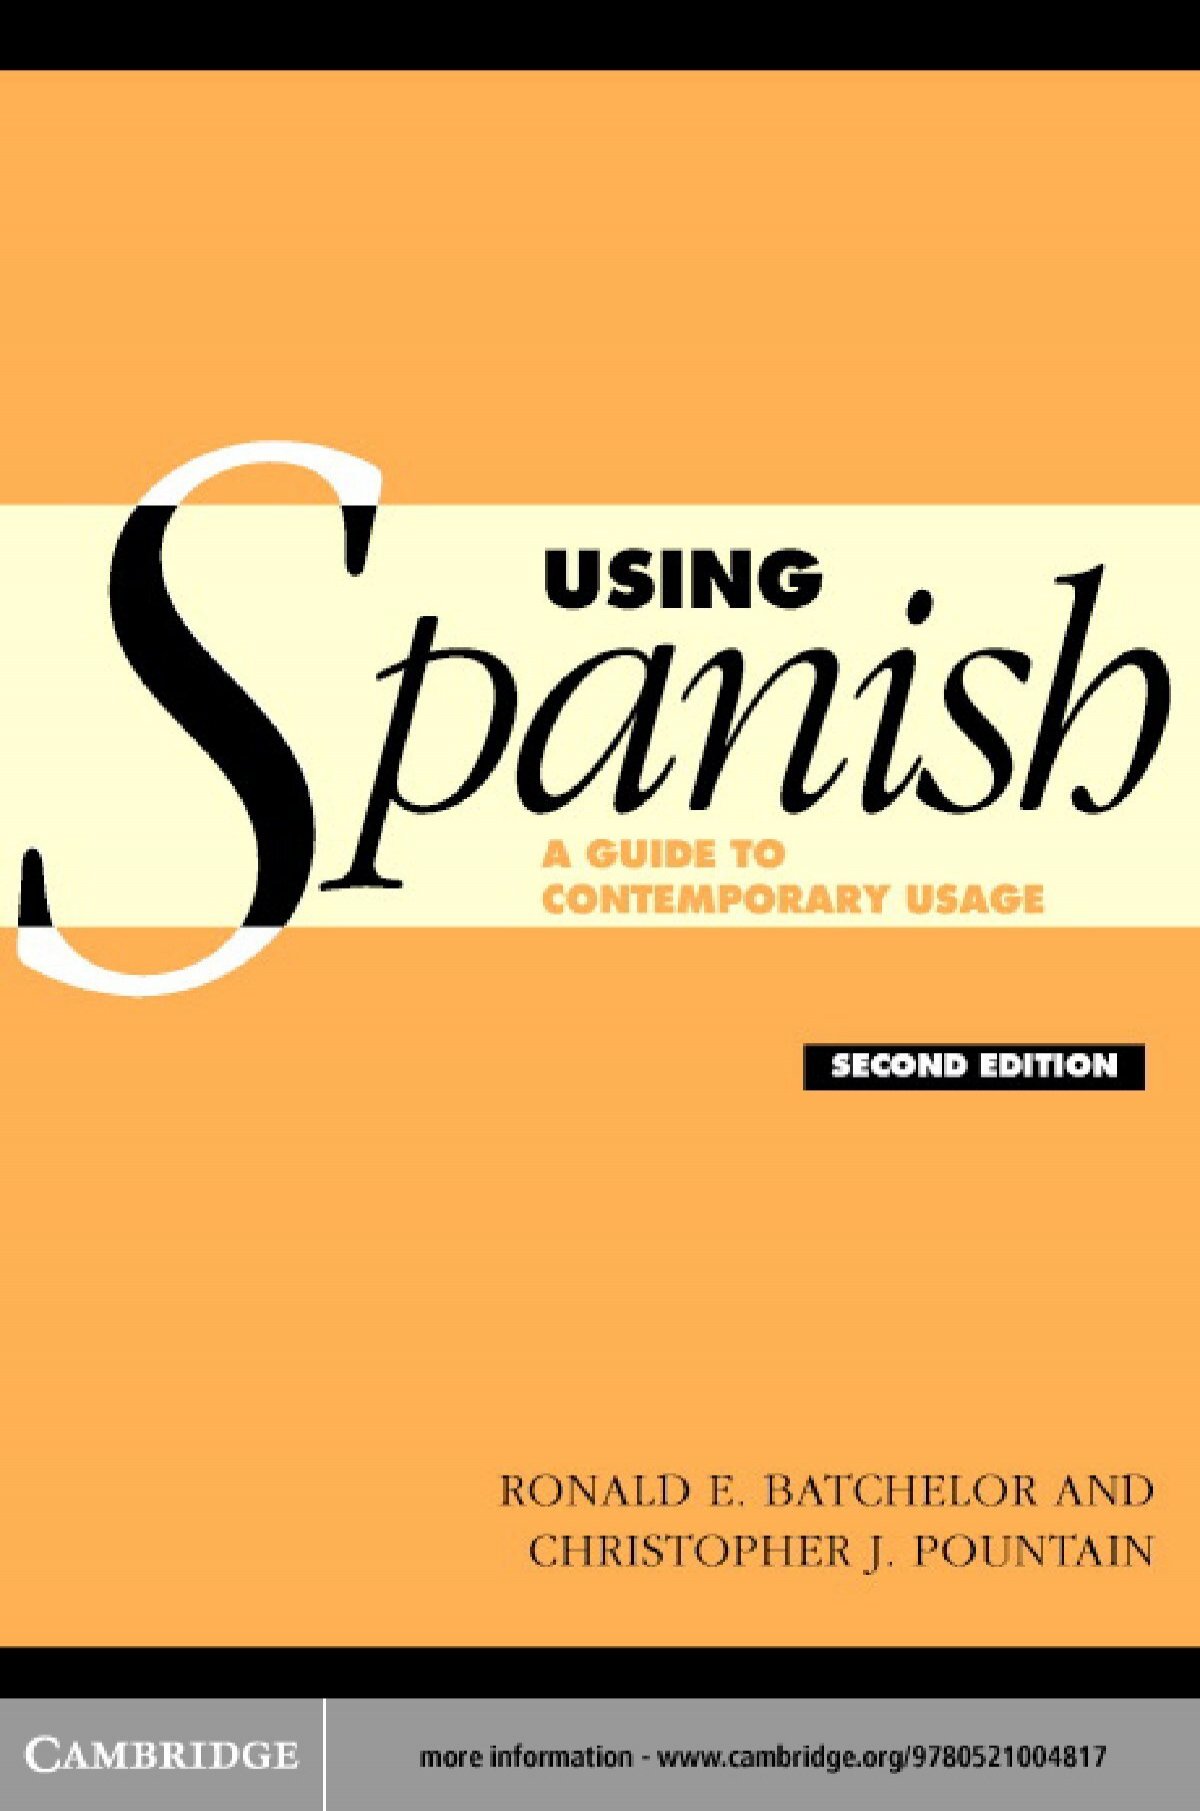 Using Spanish: A guide to contemporary usage, Second edition